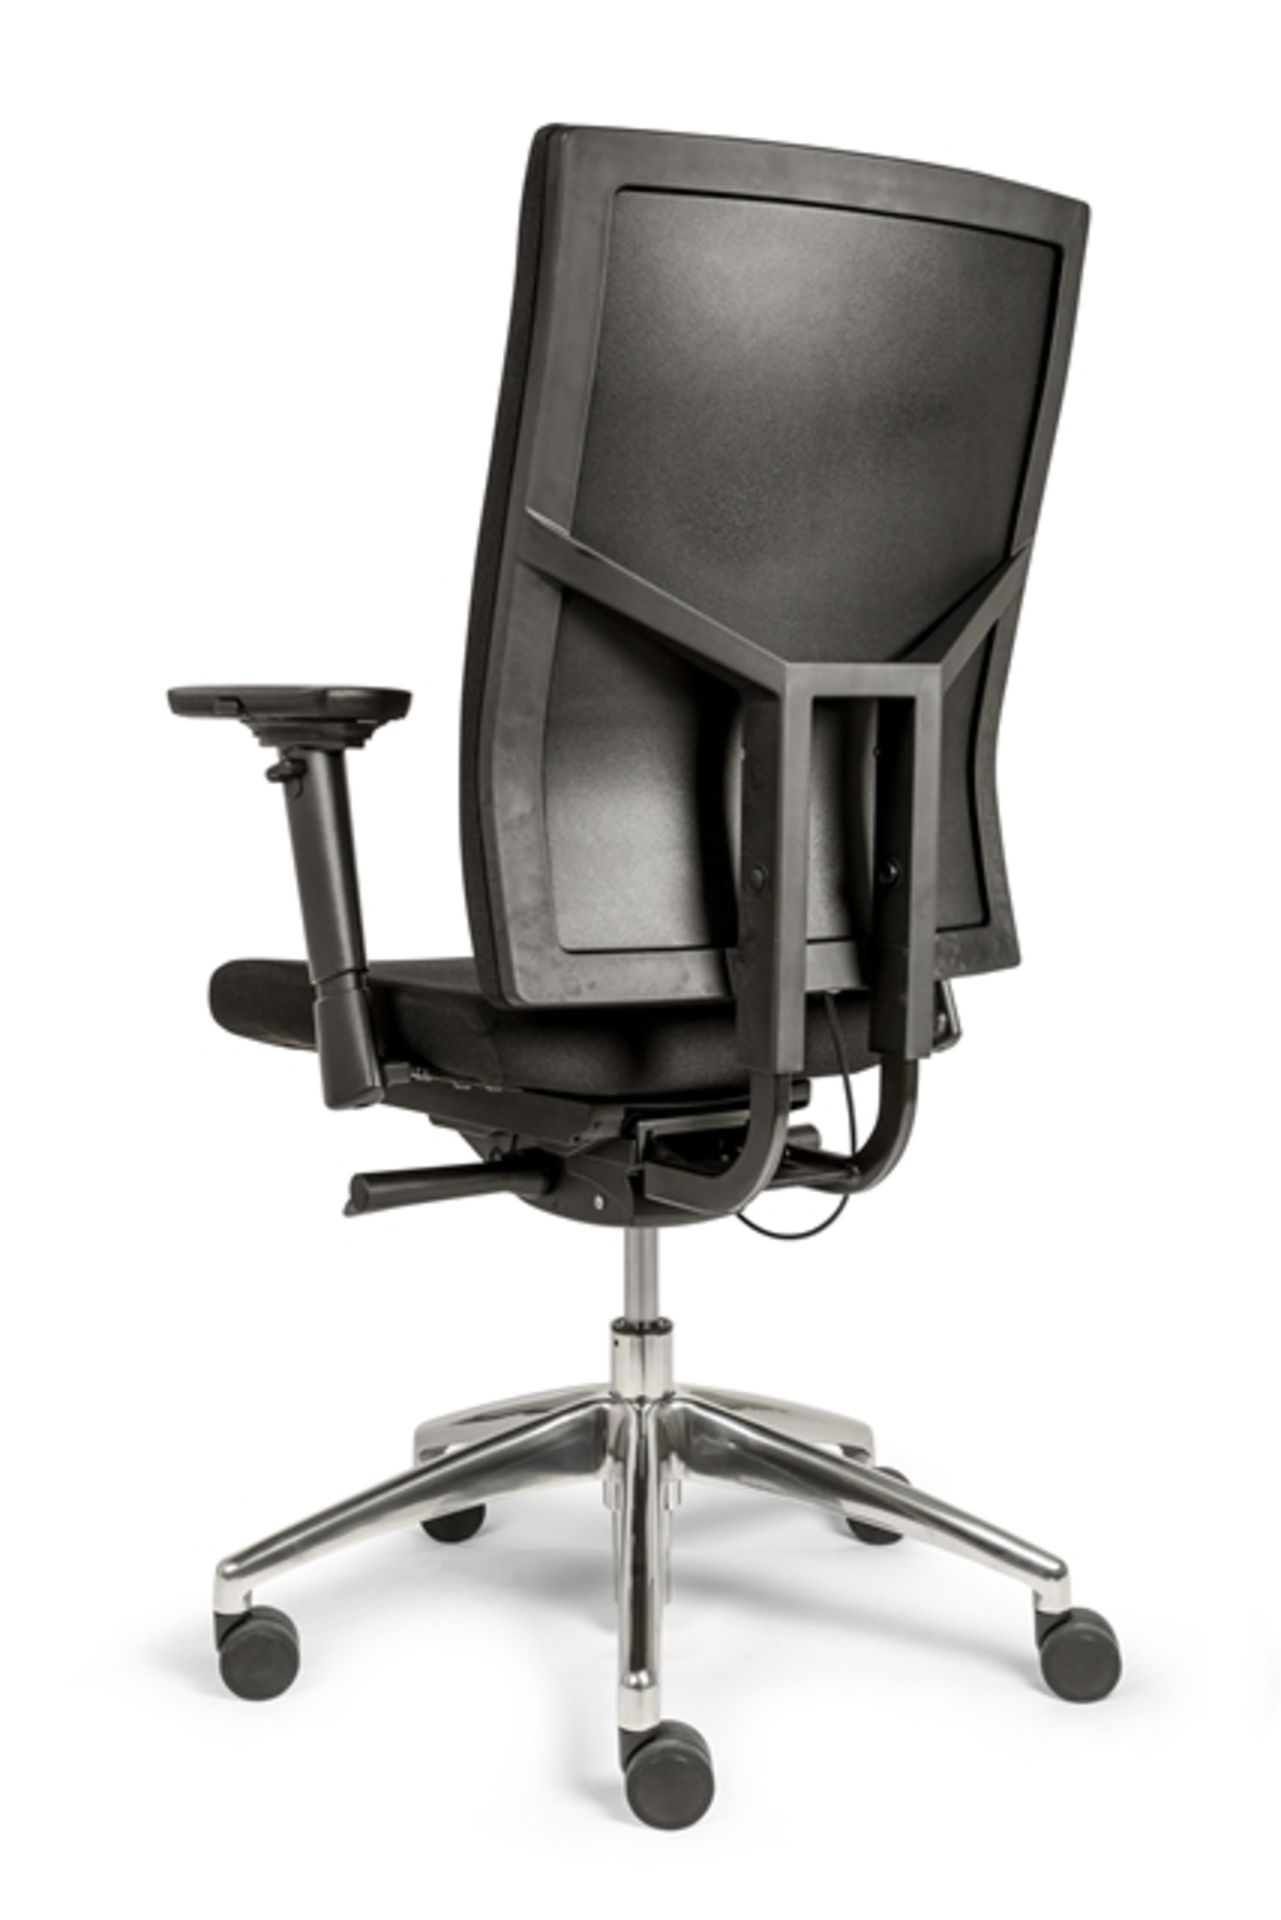 Unused ergonomic fully upholstered office chair in black (RRP £289) located in Stafford, viewing - Image 5 of 7